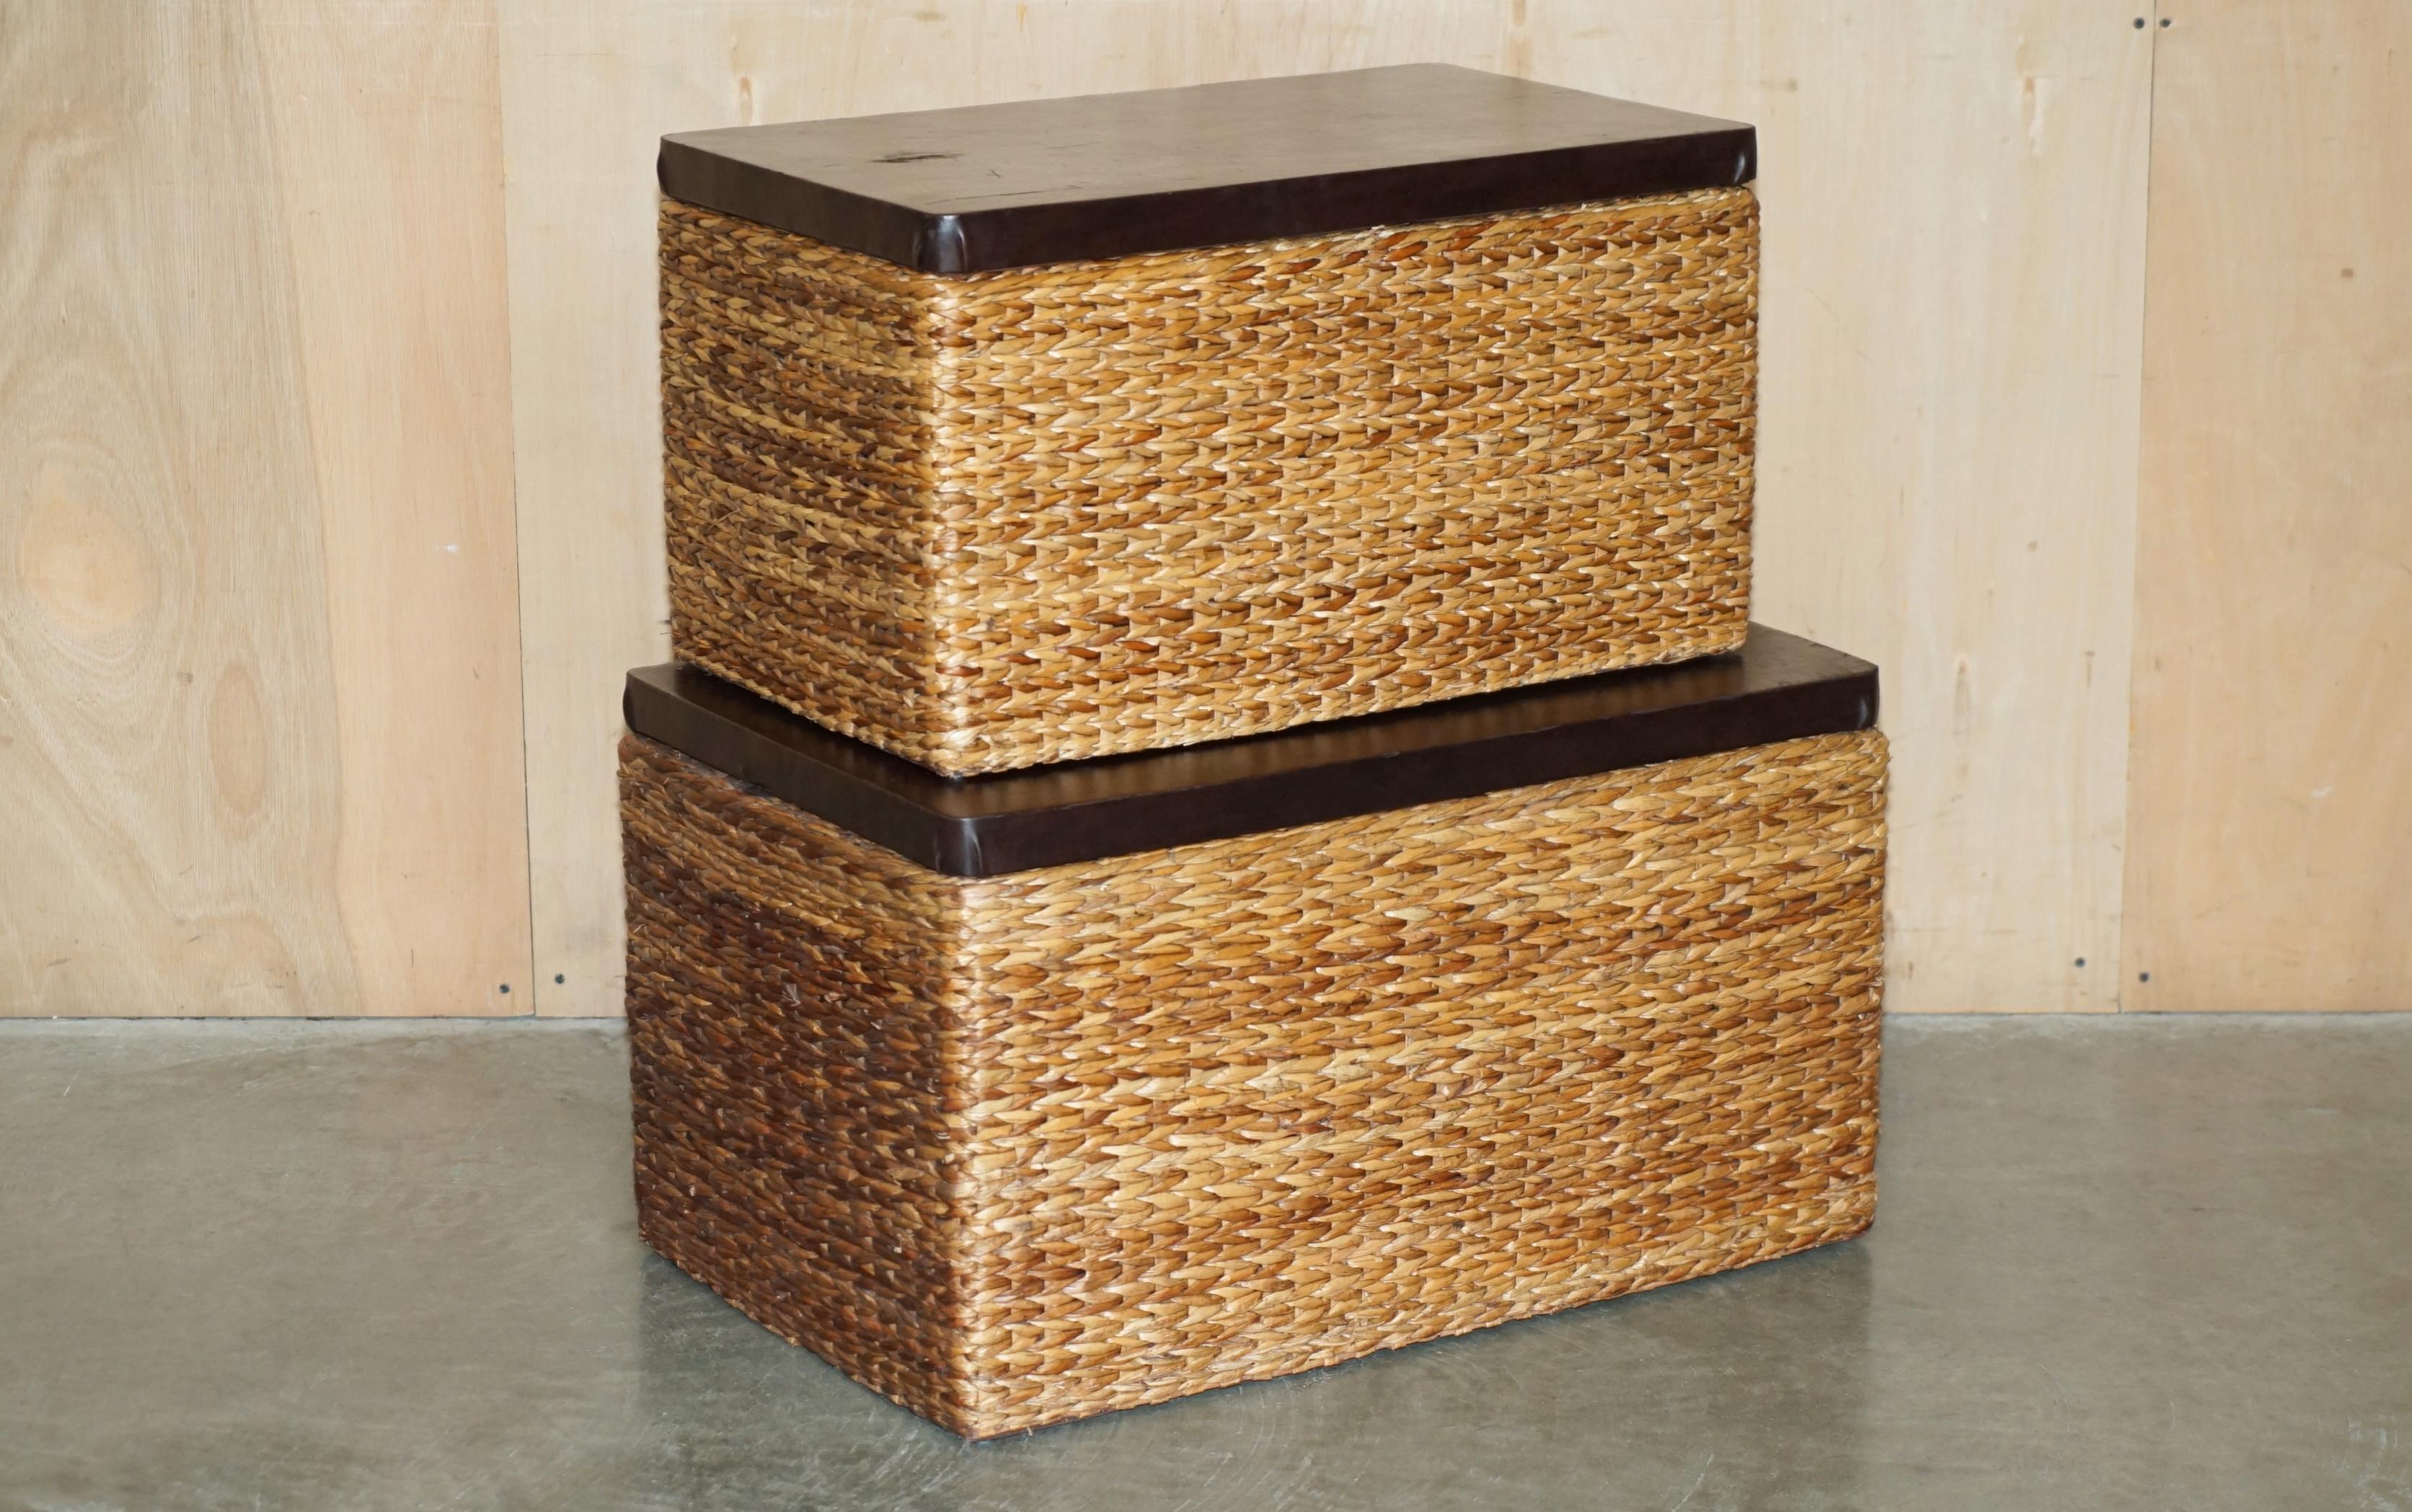 Royal House Antiques

Royal House Antiques is delighted to offer for sale this lovely pair of vintage wicker storage trunks with hardwood tops that can be used as seats and storage of linens and toys etc 

Please note the delivery fee listed is just